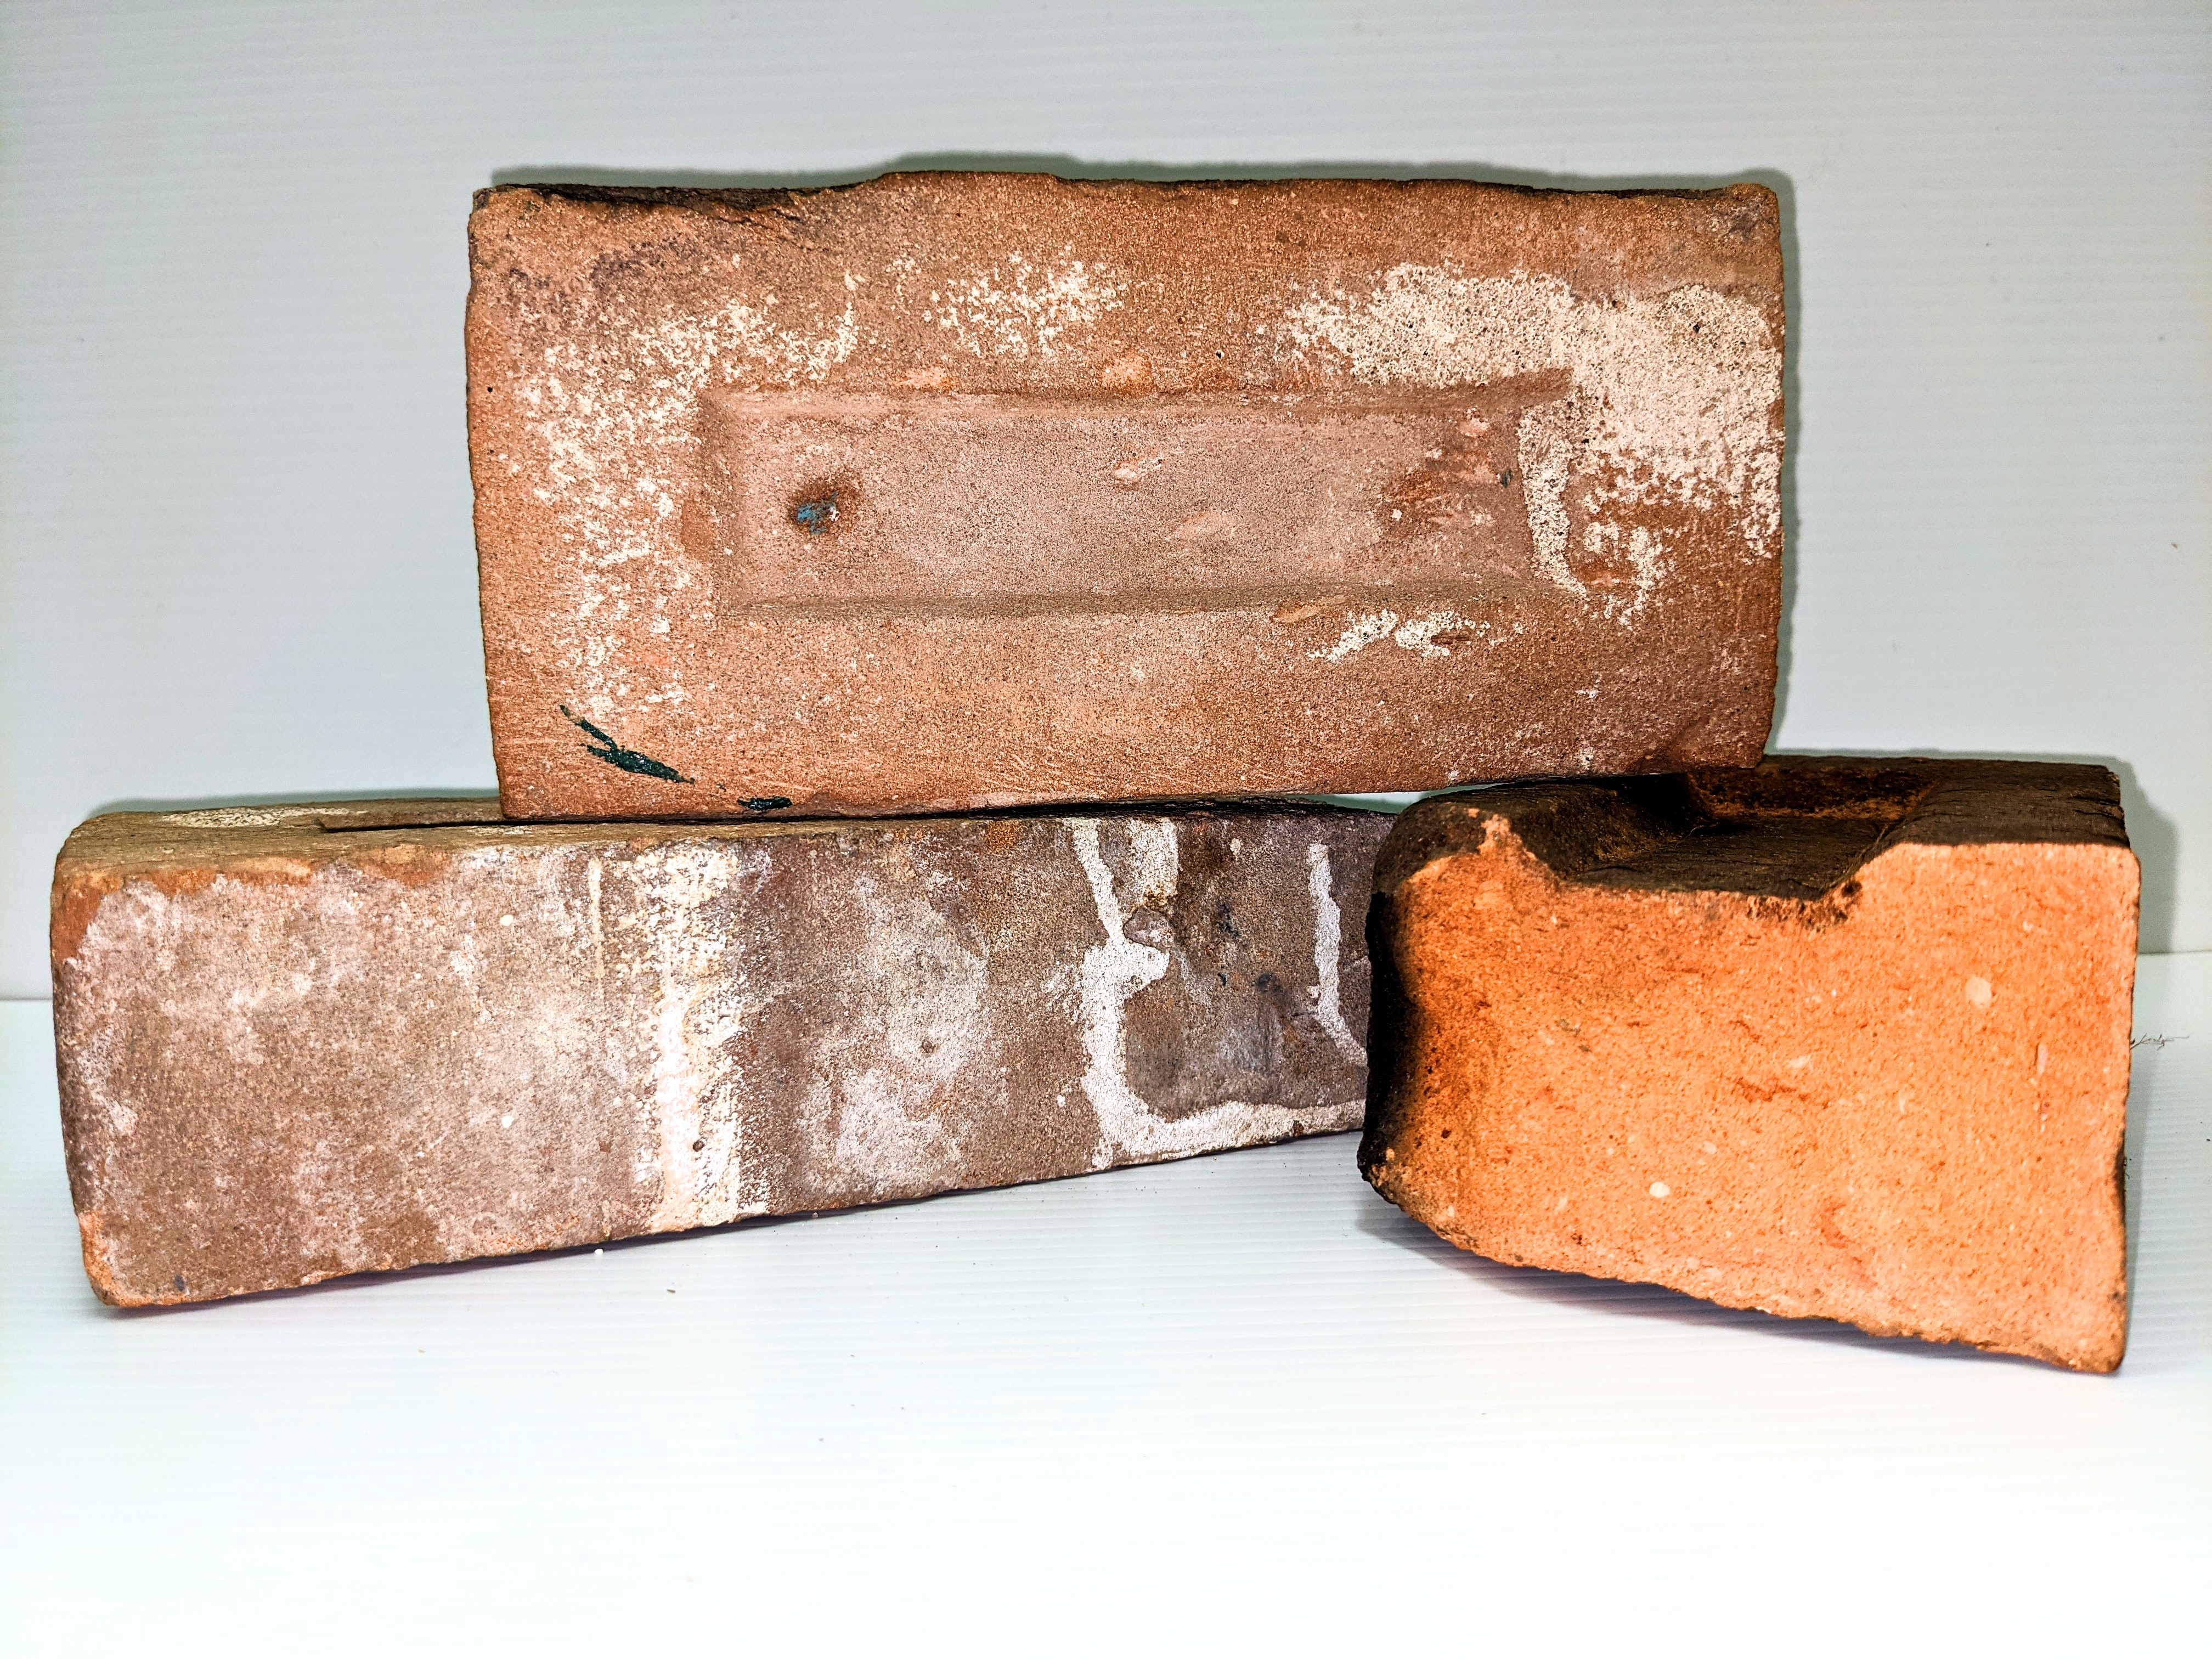 These bricks were made locally in Fort Vermilion! The Carruthers family owned and operated a brickyard on the outskirts of Fort Vermilion. Operational from 1903-1905, it was the most northern brickyard in Alberta and produced bricks for local construction and settlements further north such as Hay River. The Old Bay House and Clarke House chimneys are made with bricks from this yard.

05/04/2021
2009.5.1 / Toews, Marilee
986.2 / Bell, Lorna